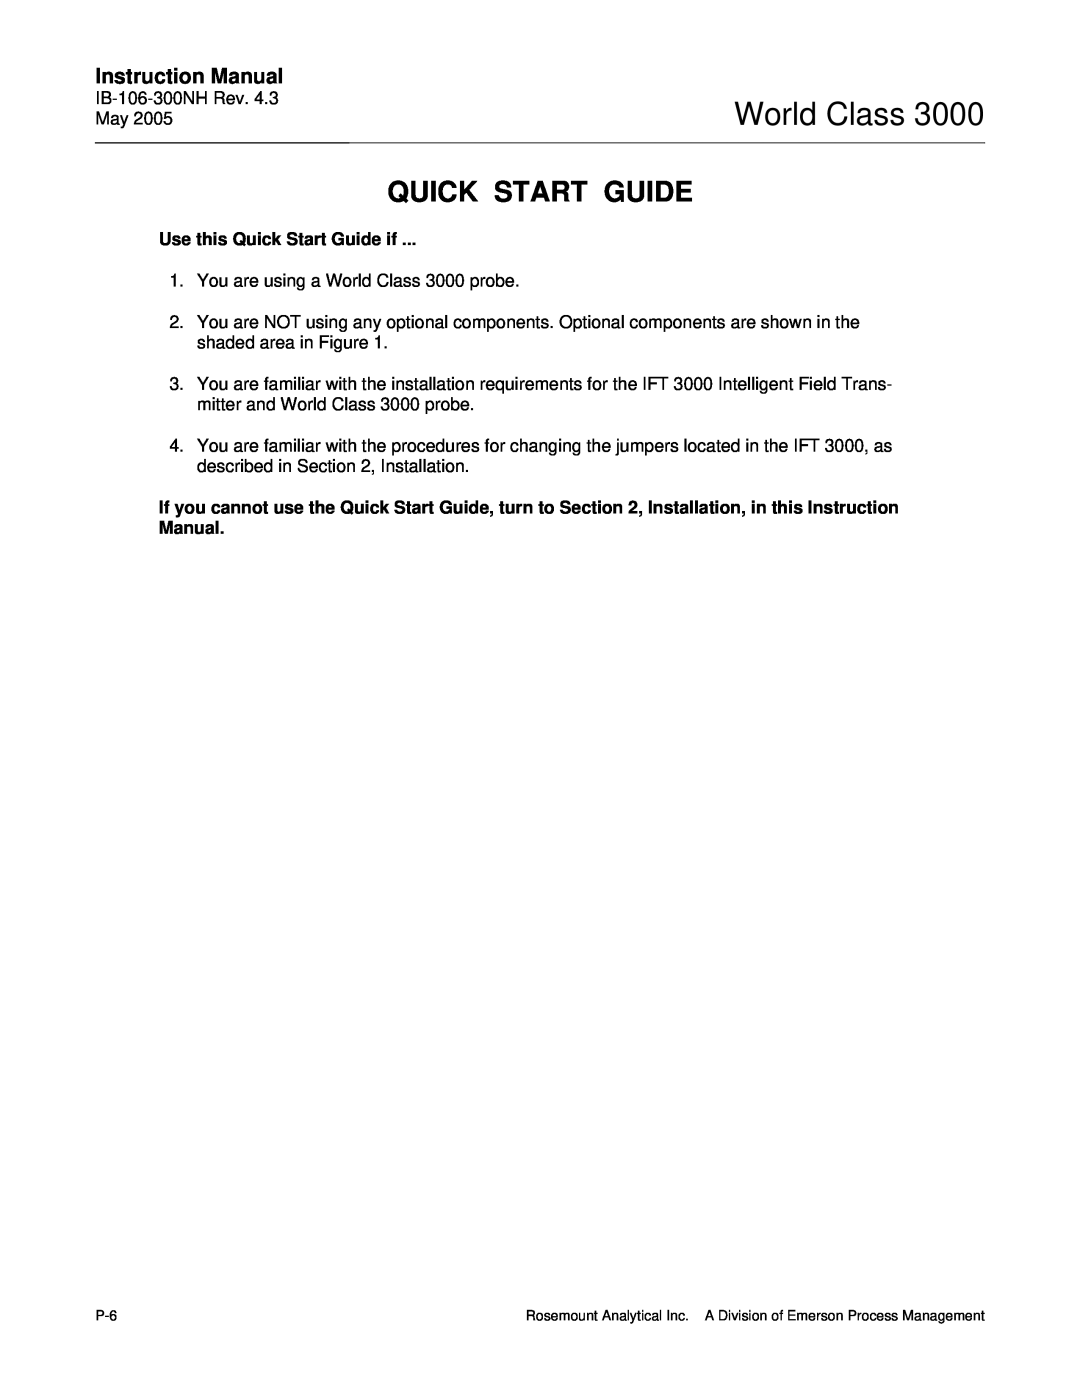 Emerson 3000 instruction manual World Class, Instruction Manual, Use this Quick Start Guide if 